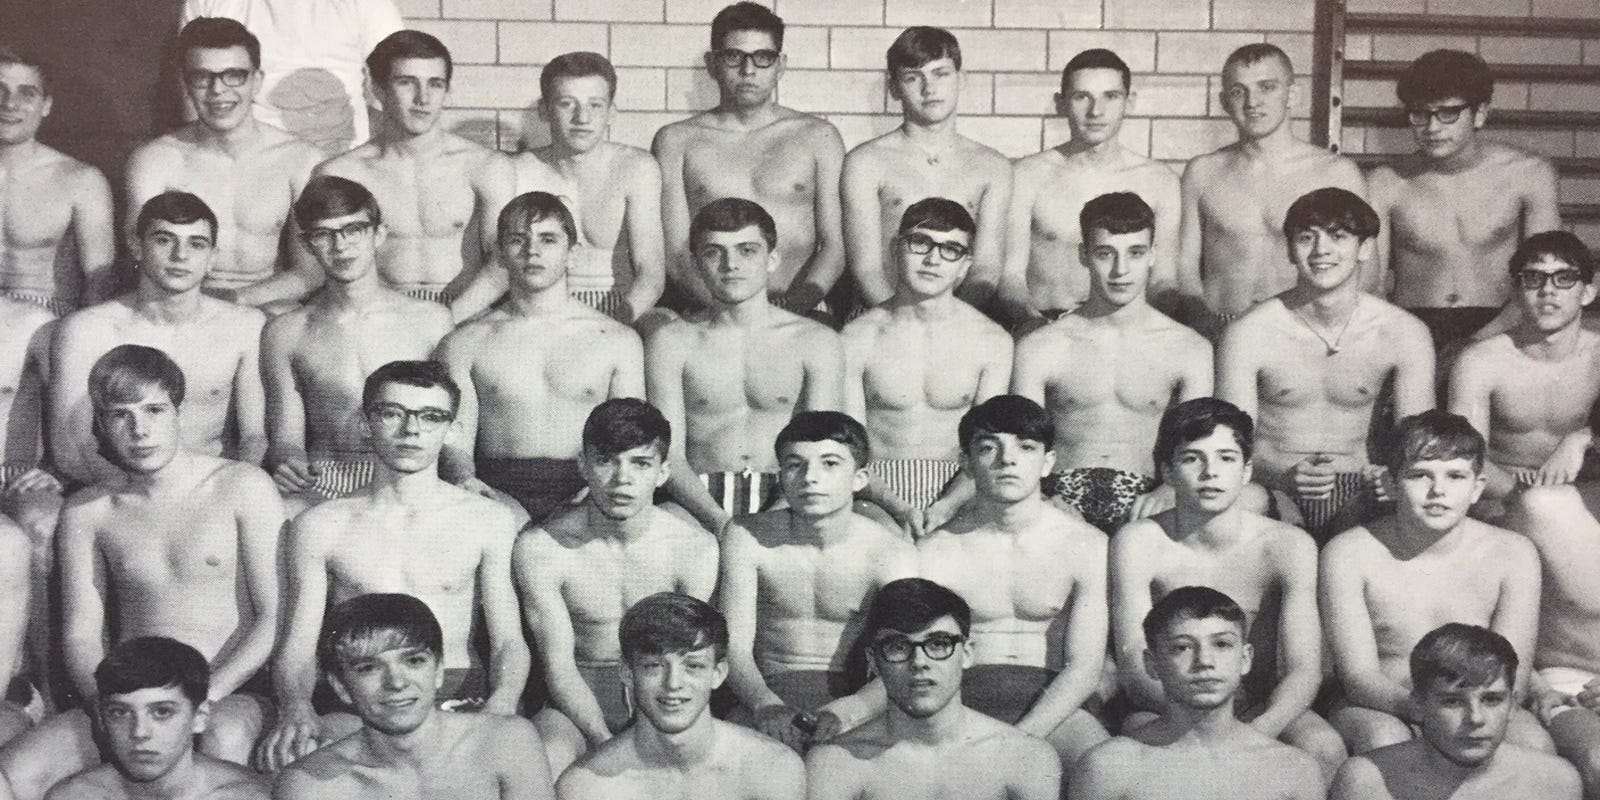 Vintage Nudism Life Galleries - Andreatta: When boys swam nude in gym class